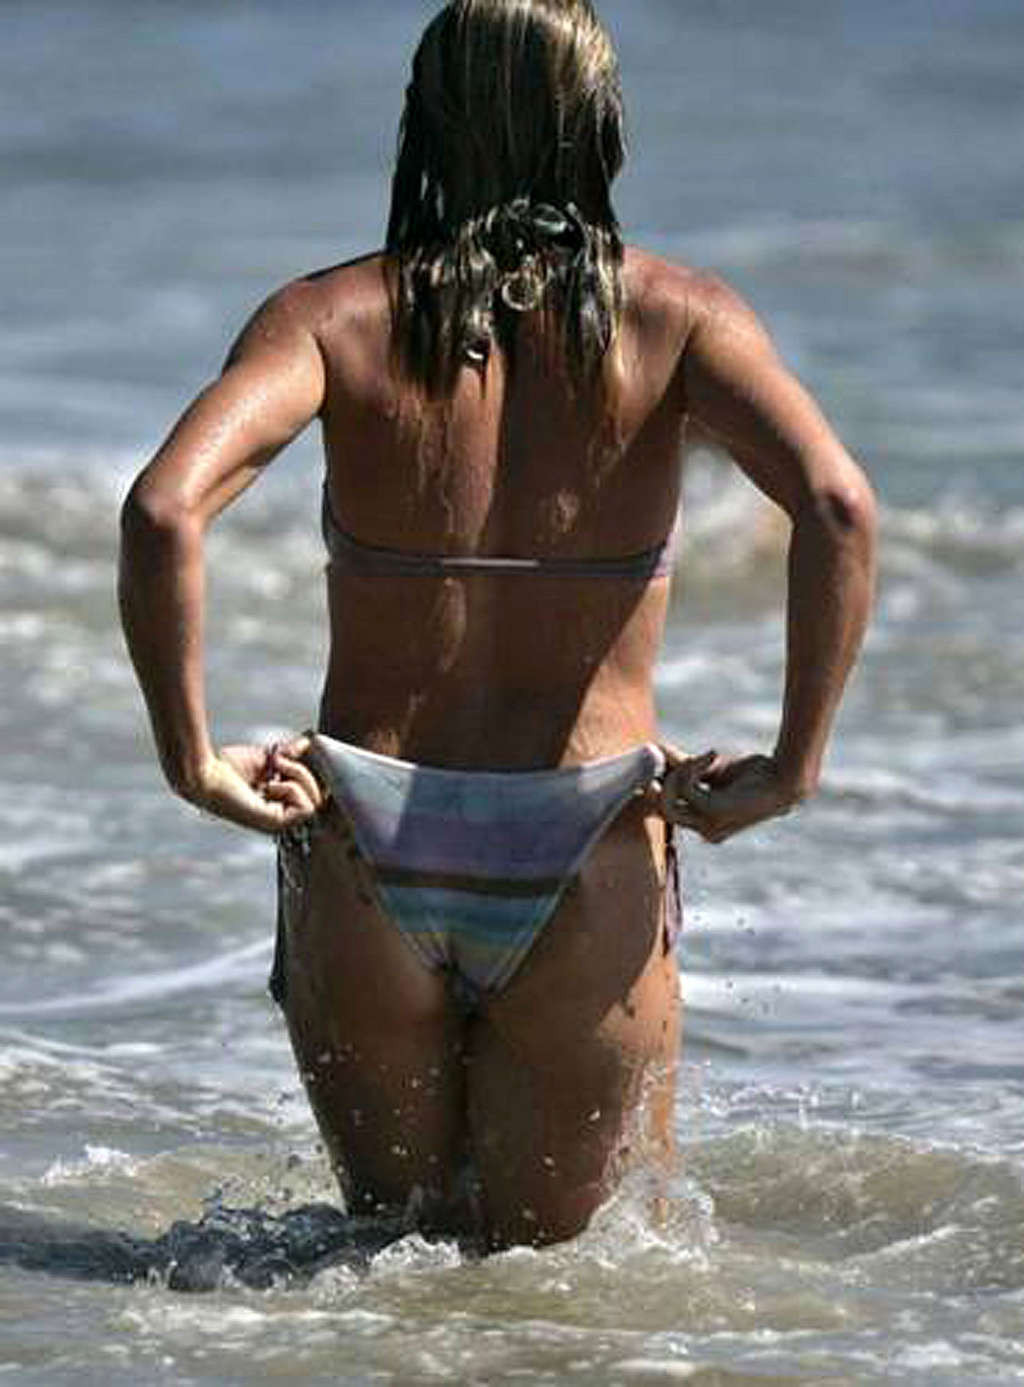 Cameron Diaz showing sexy ass in thong and enjoying on beach in topless #75365978